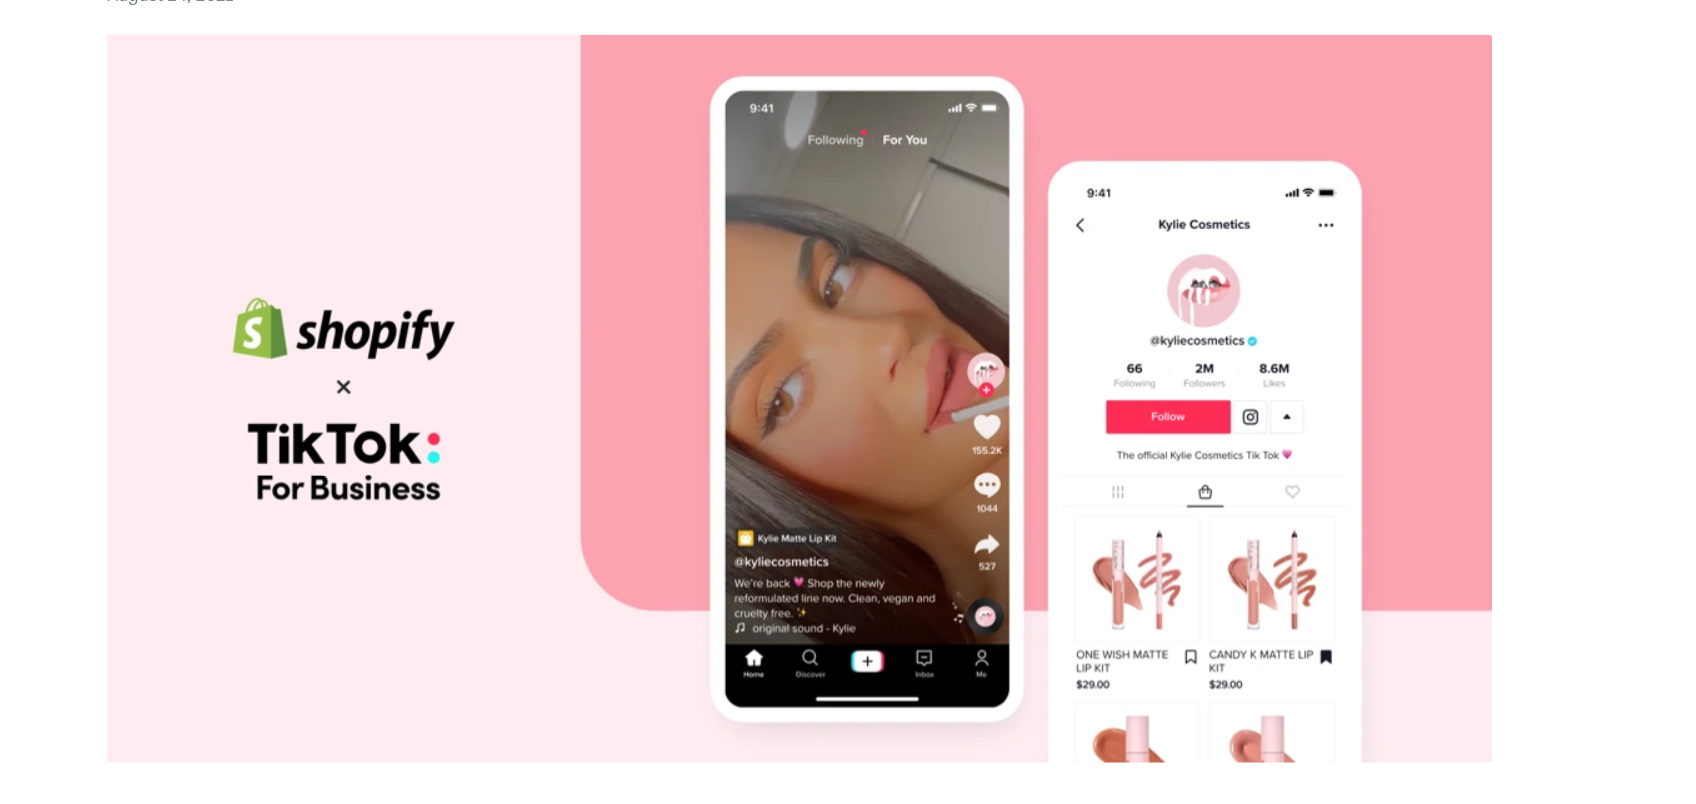 Screenshot of the Shopify x TikTok page on news.shopify.com promoting their cooperation